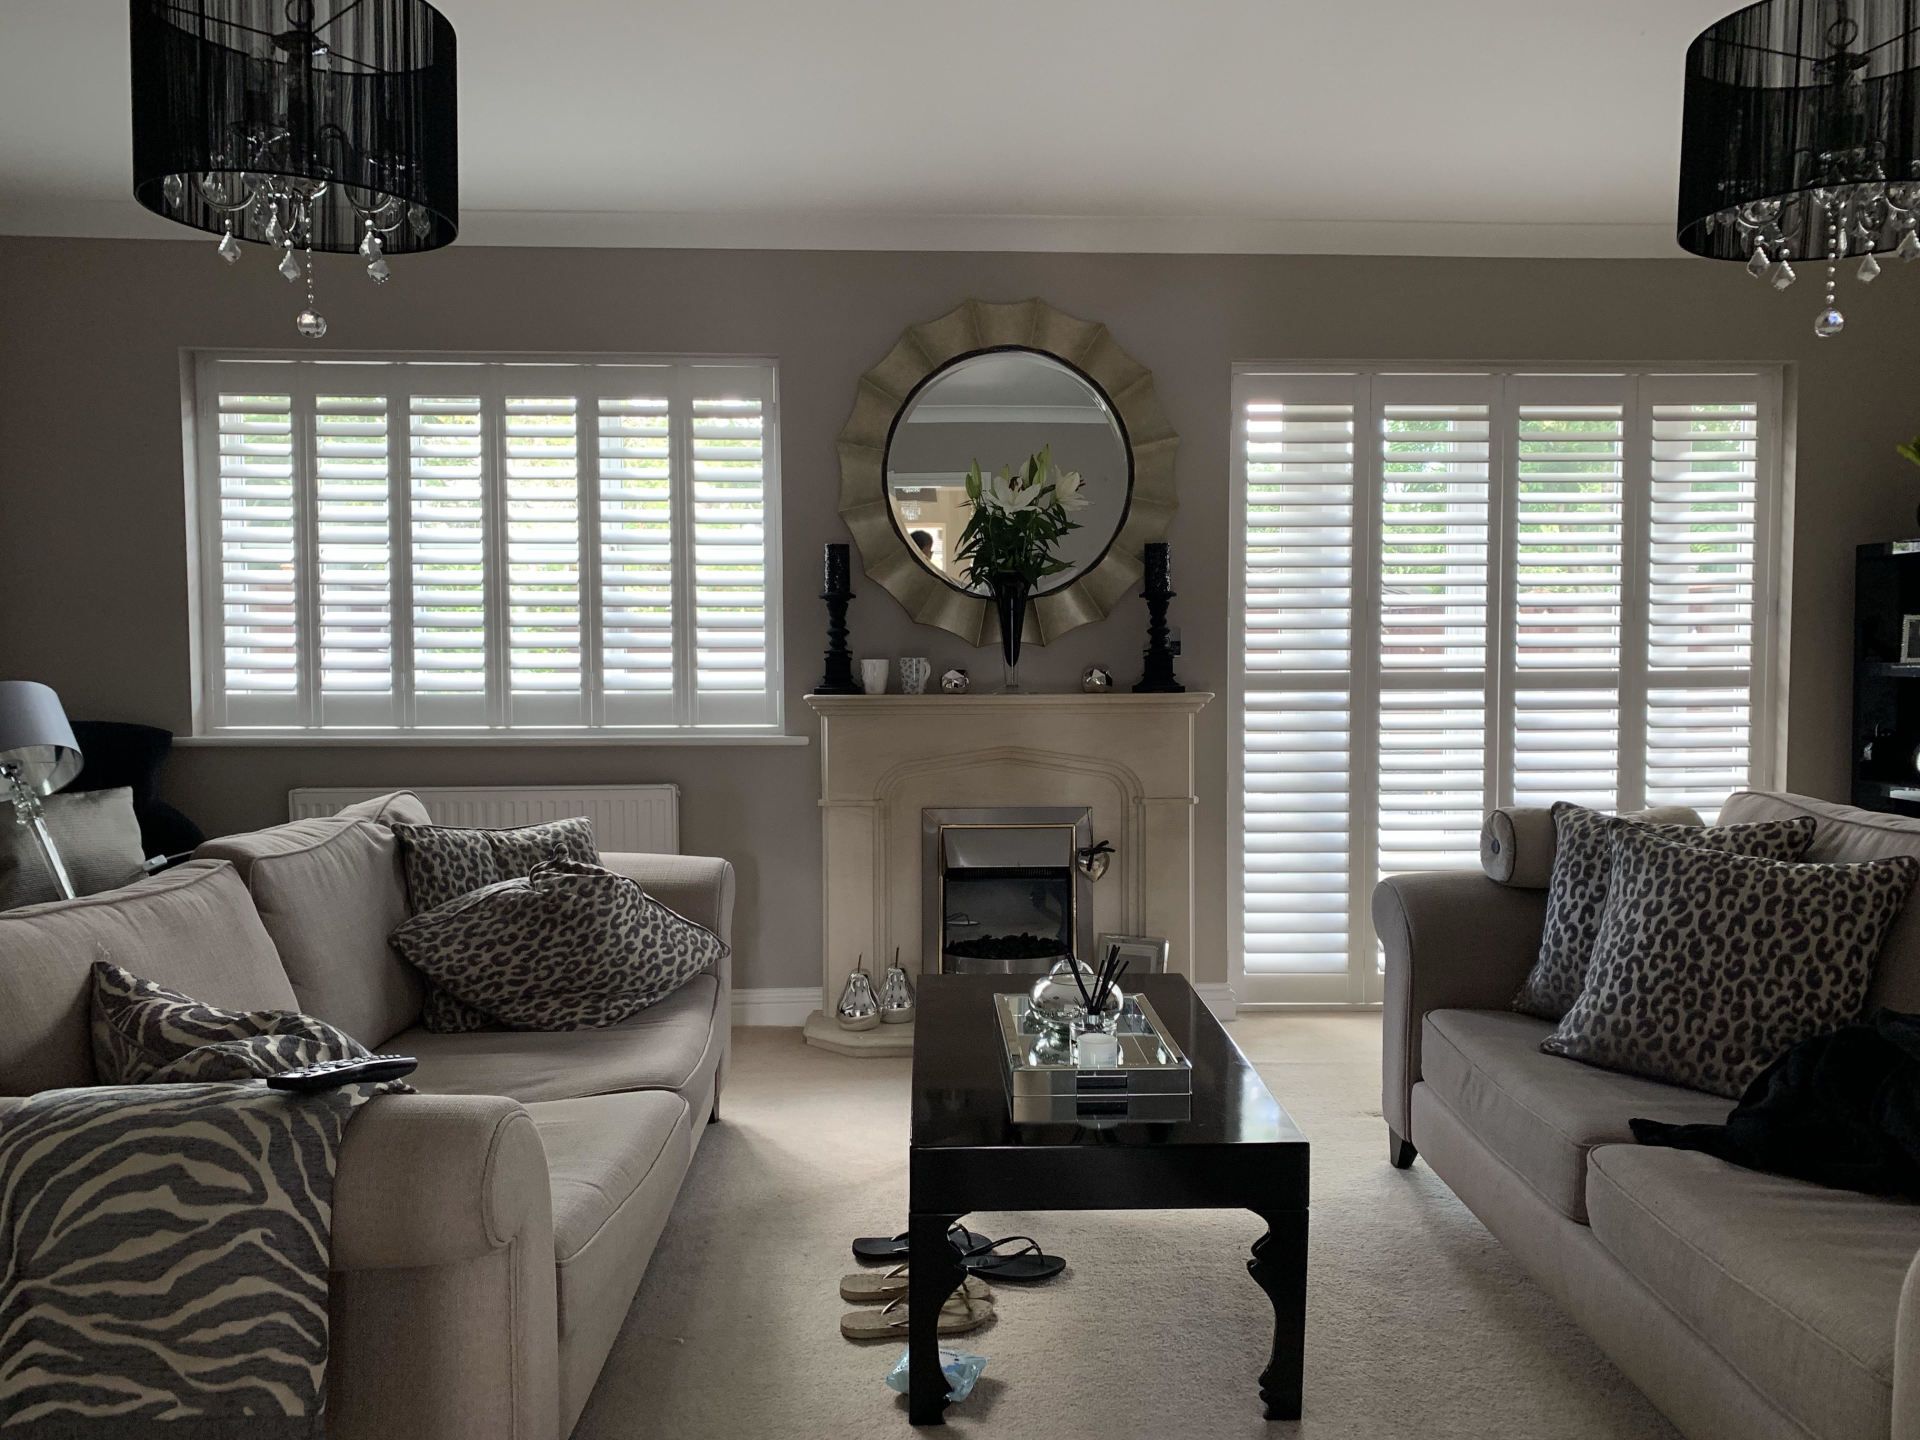 British Made Shutters available to purchase in Sutton | Wooden Shutters | Patio Door Shutters |  Made-to-Measure Shutters